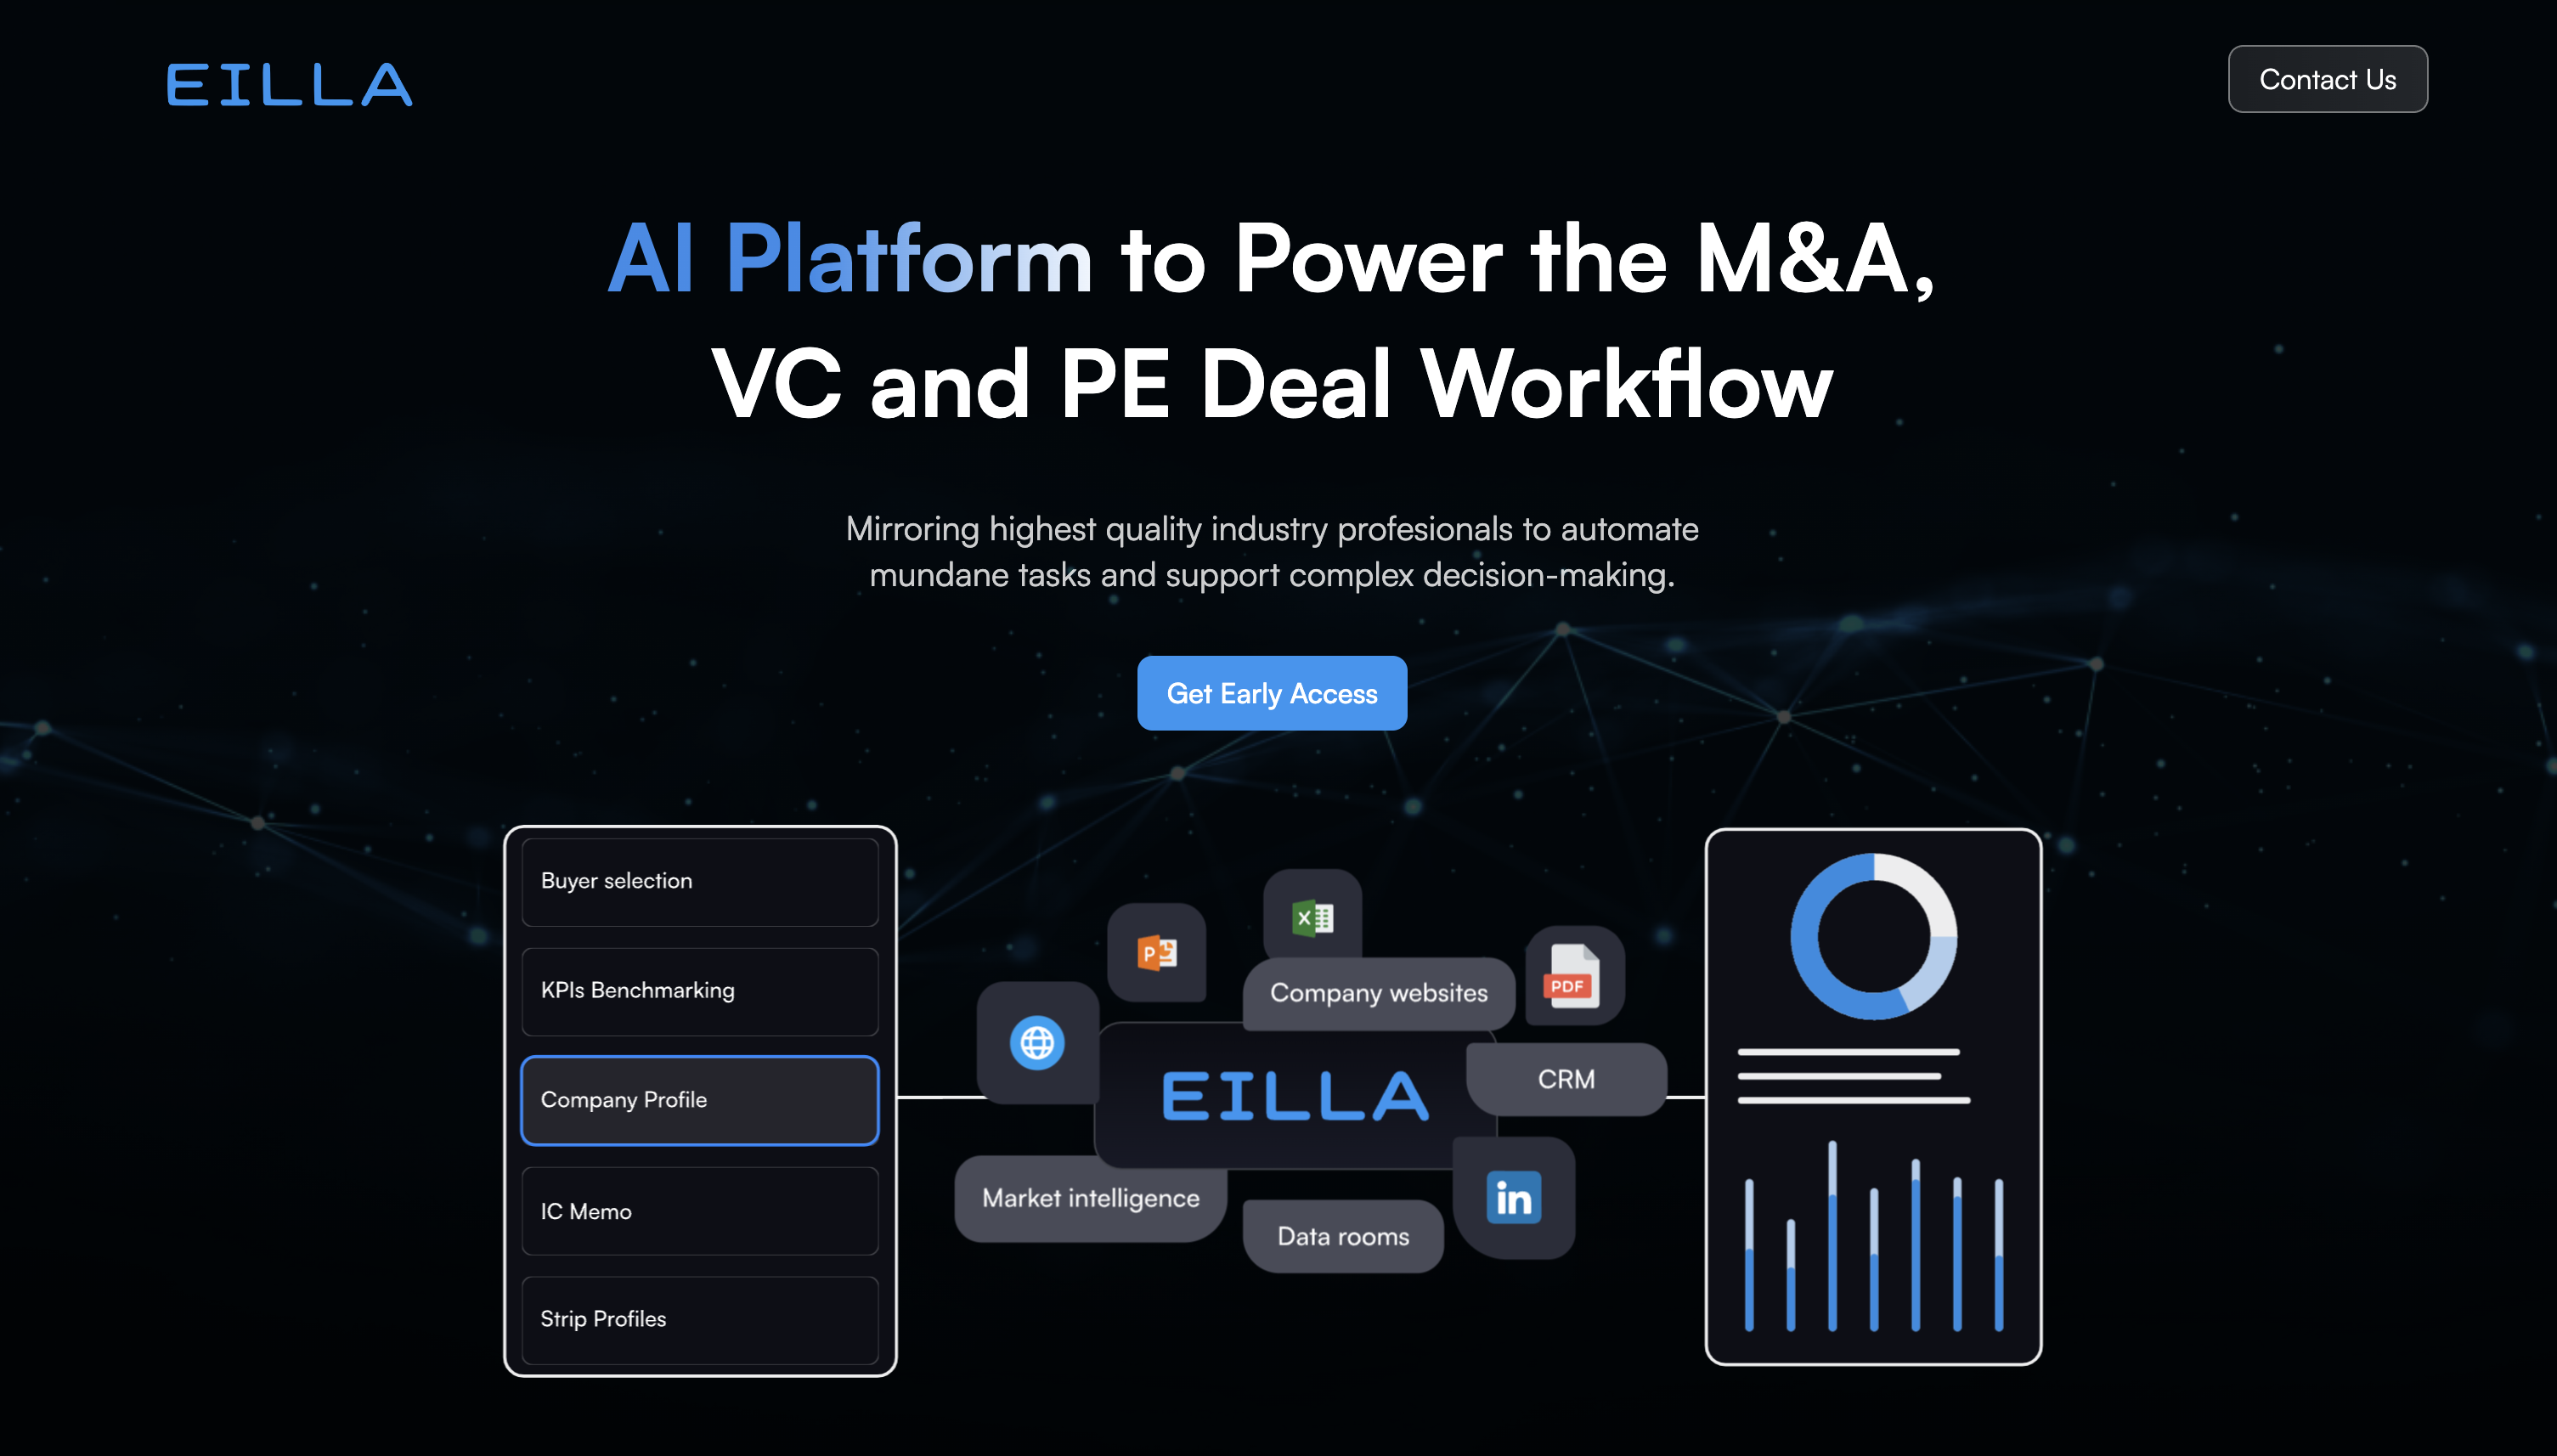 AI Platform to Power the M&A, VC and PE Deal Workflow